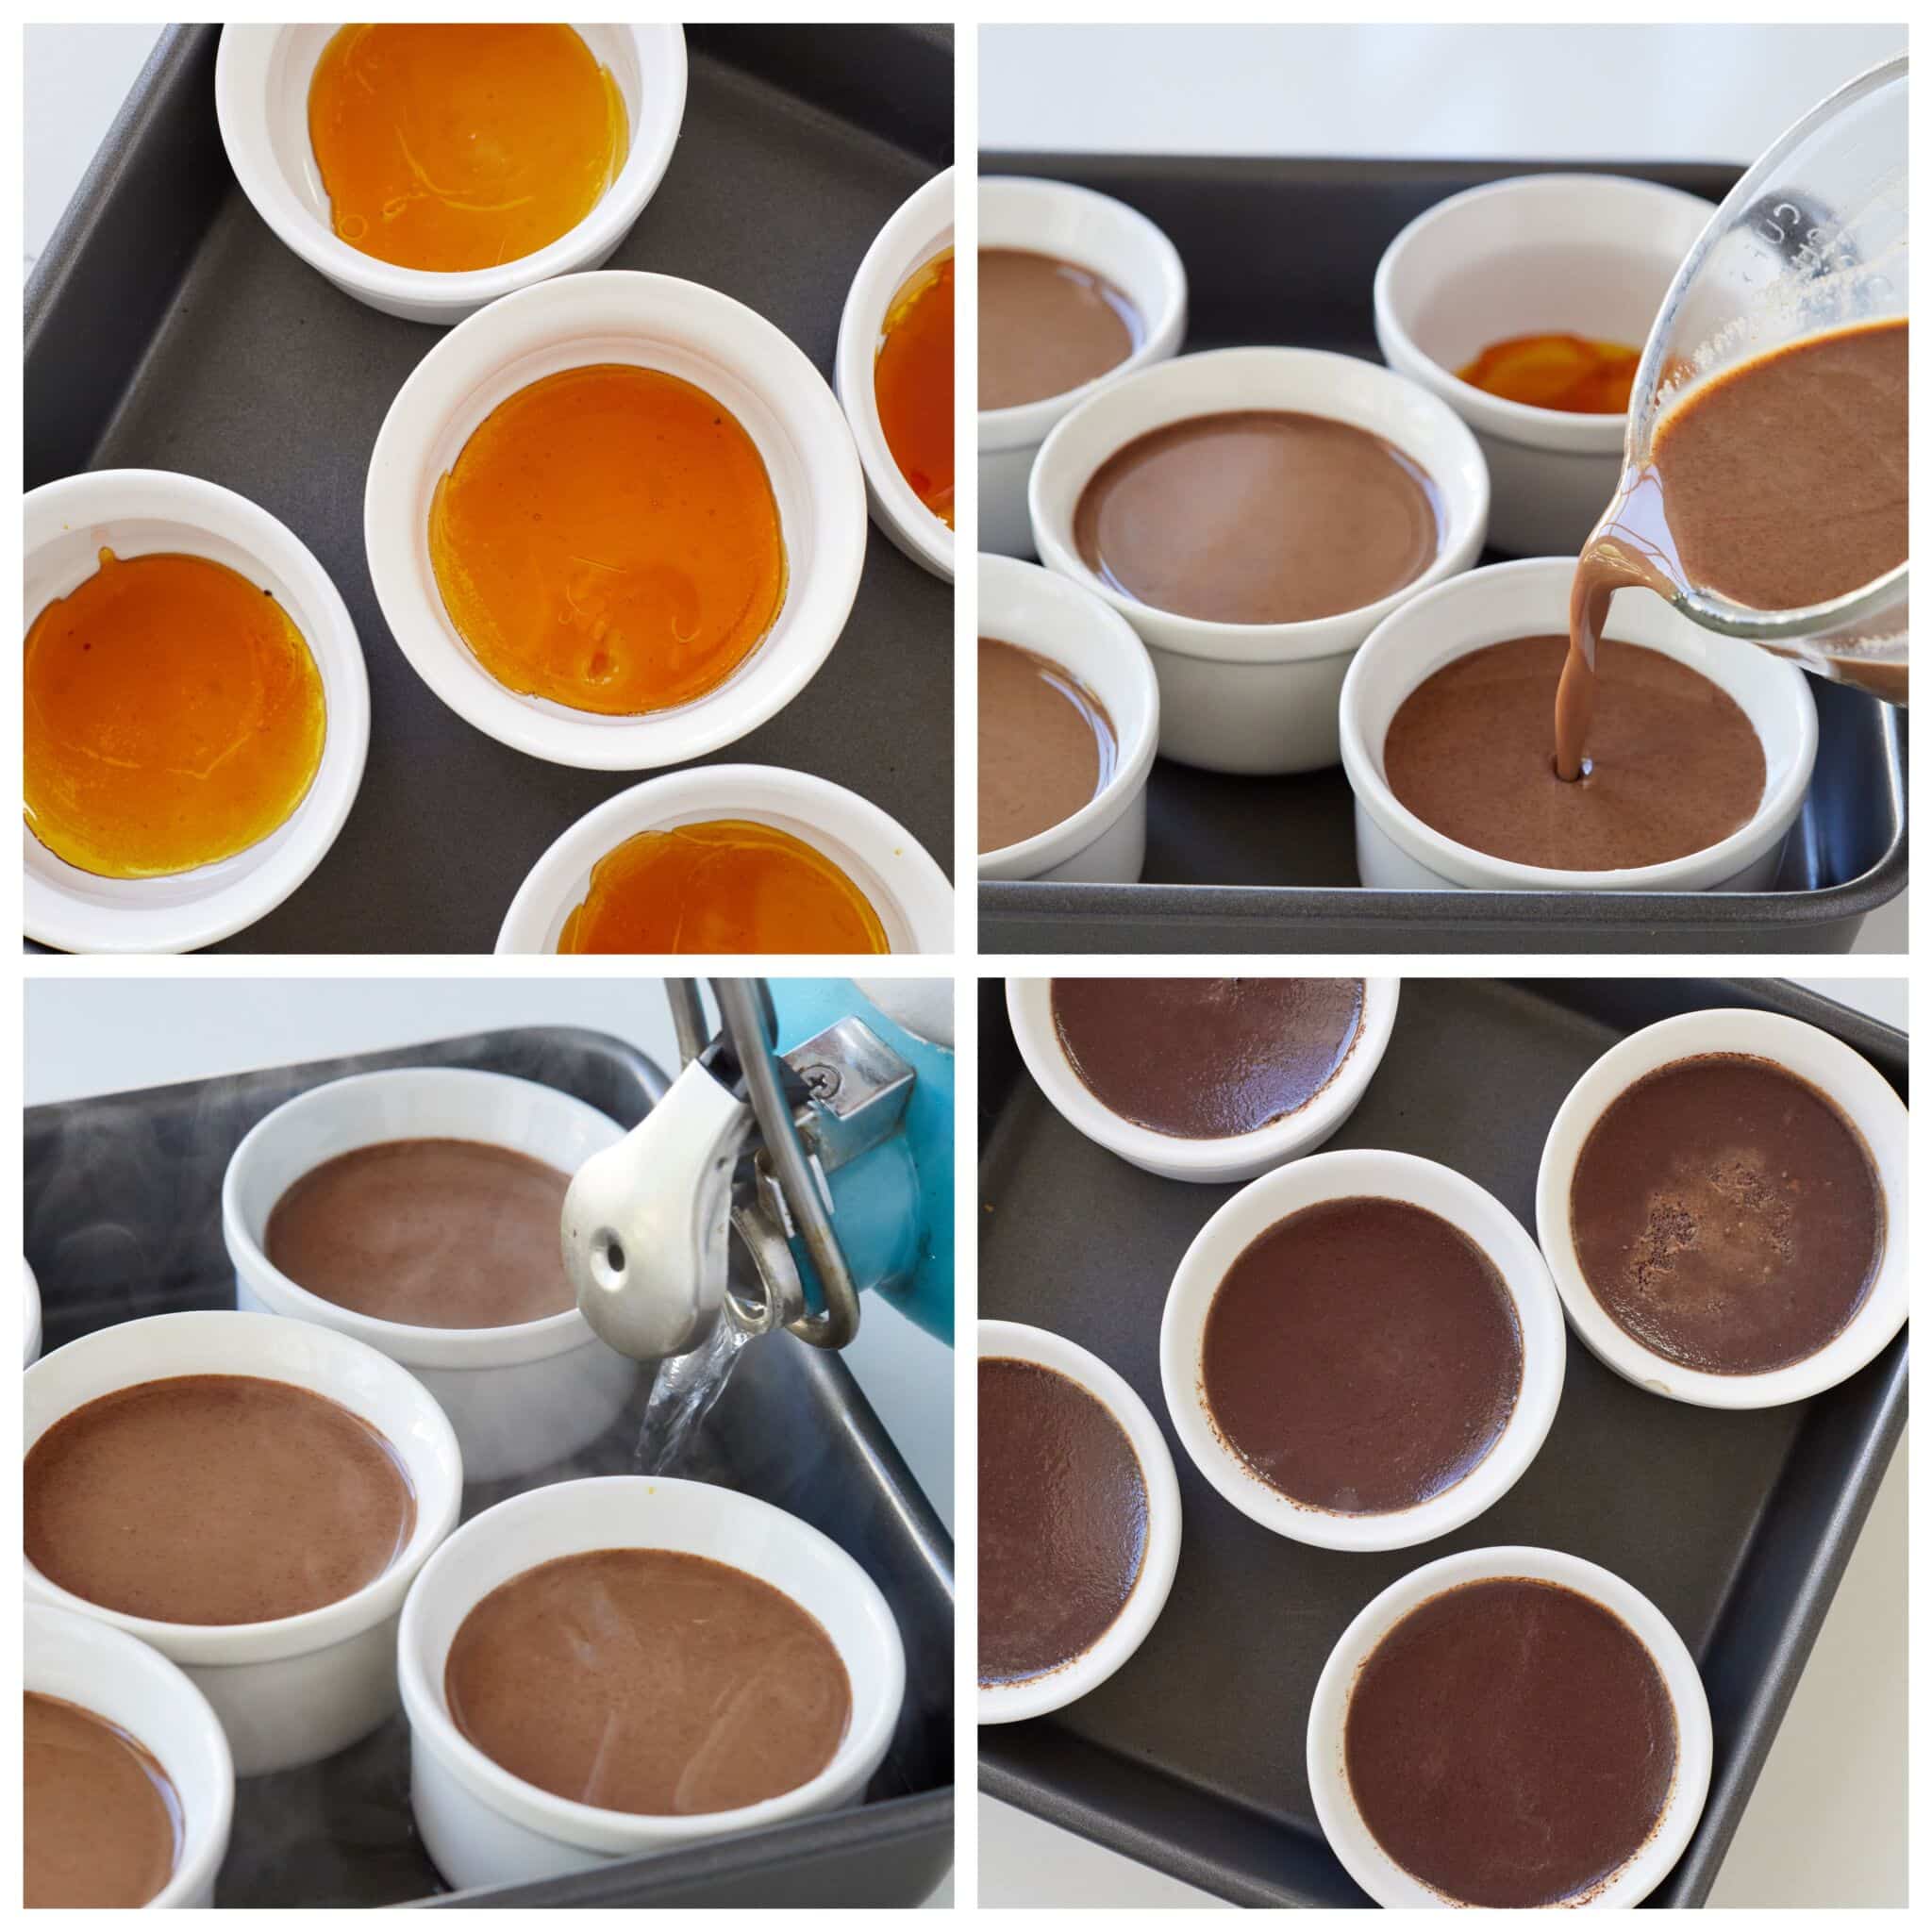 Step-by-step instructions on how to make Chocolate Crème Caramel: divide cooked caramel in ramekins. Pour custard into ramekins and add boiling water in the baking tray. Bake in a water bath until the custard sets but the middle is slightly jiggly.